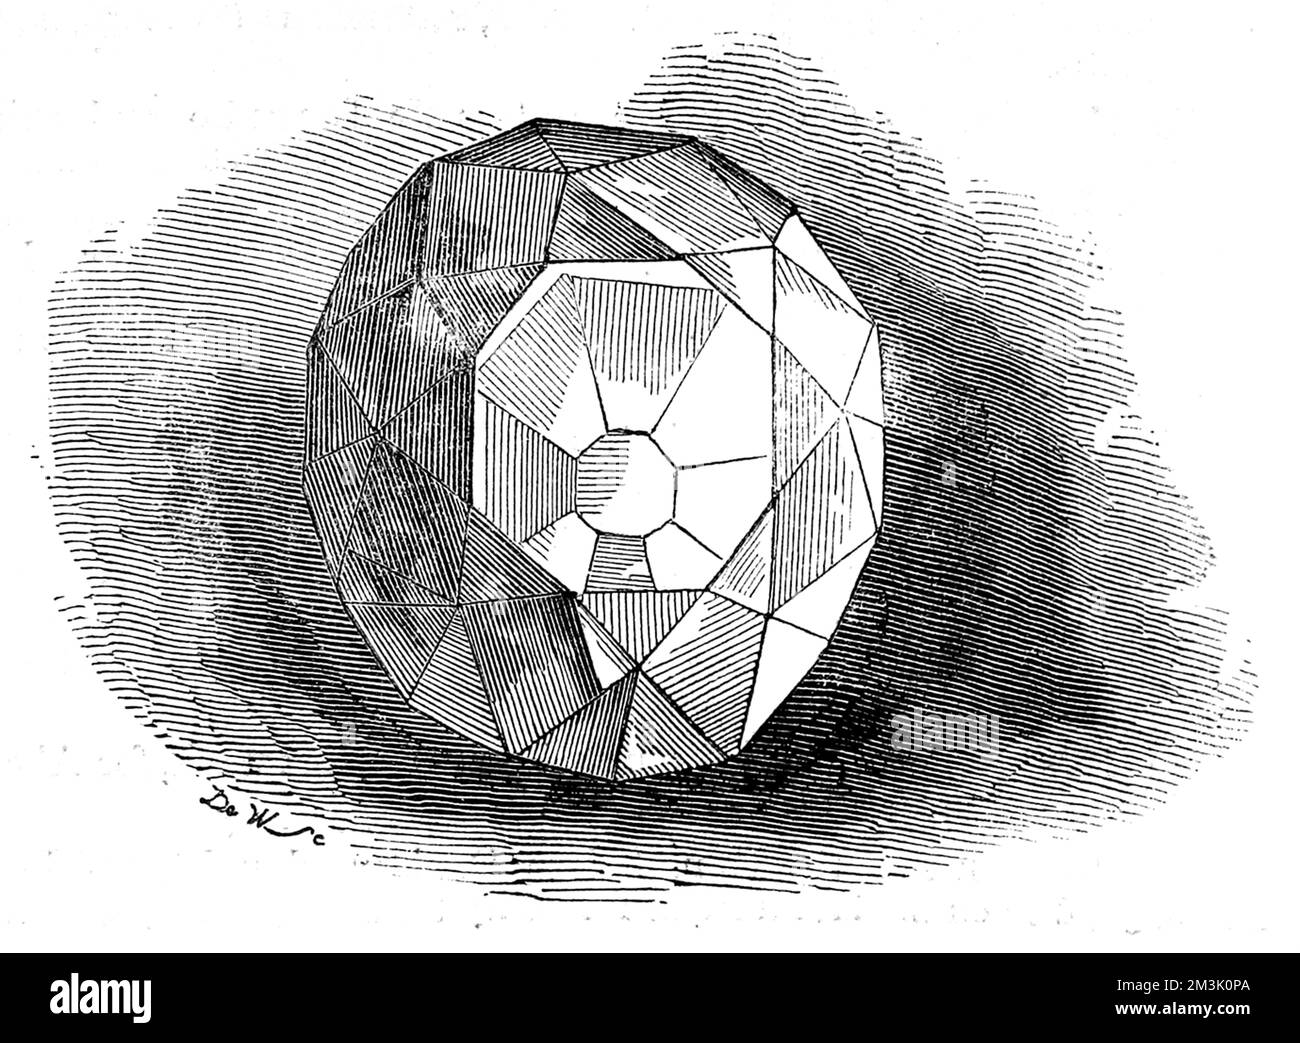 Engraving of the re-cut Koh-i-noor ('mountain of light') diamond, 1852. Previously owned by the Mogul emperors, the Persian Shahs and Ranjit Singh, the Lion of the Punjab, it was presented to Queen Victoria by the East India Company in 1850.  The diamond was displayed at the Great Exhibition of 1851, where various experts felt it displayed insufficient fire. It was decided therefore to recut the stone. This was undertaken by Guillaume Coster, over 38 days, in 1852 to produce a round diamond of 108 carats (shown in the image).   In 1937 the diamond was placed in a crown to be worn by Queen Eliz Stock Photo